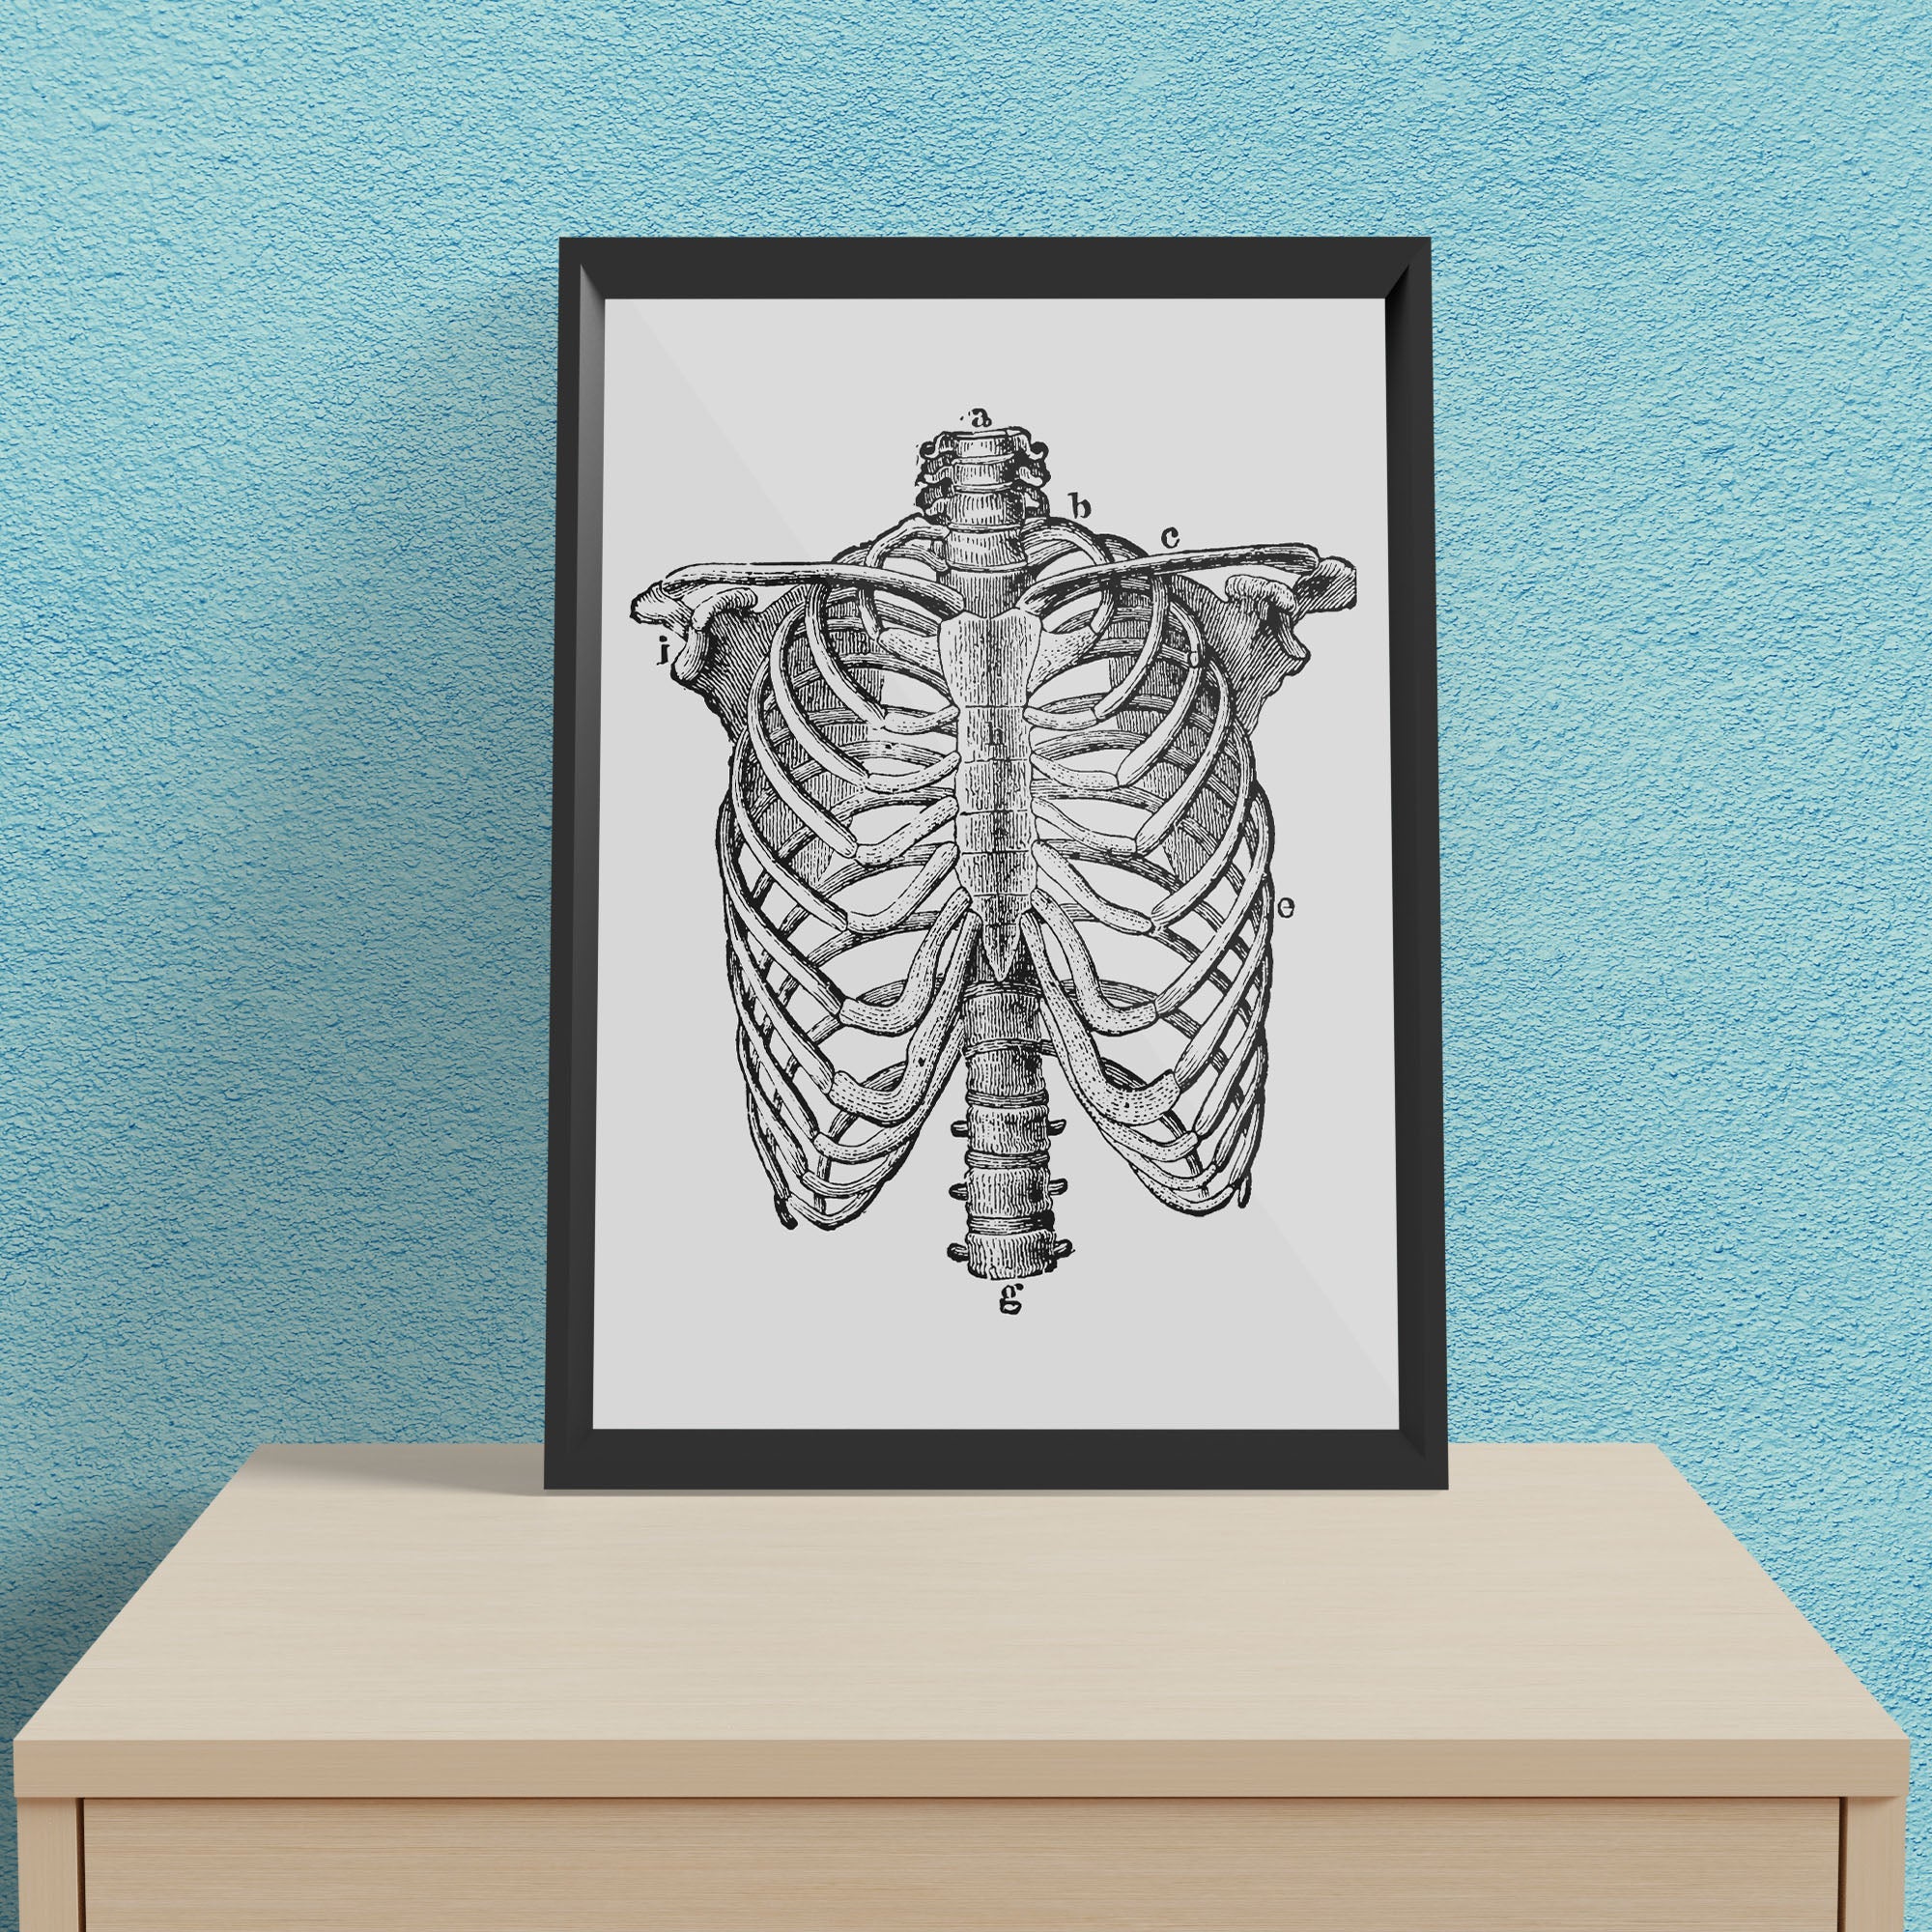 Thorax - Framed Poster For Clinics, Hospitals &amp; Study Rooms